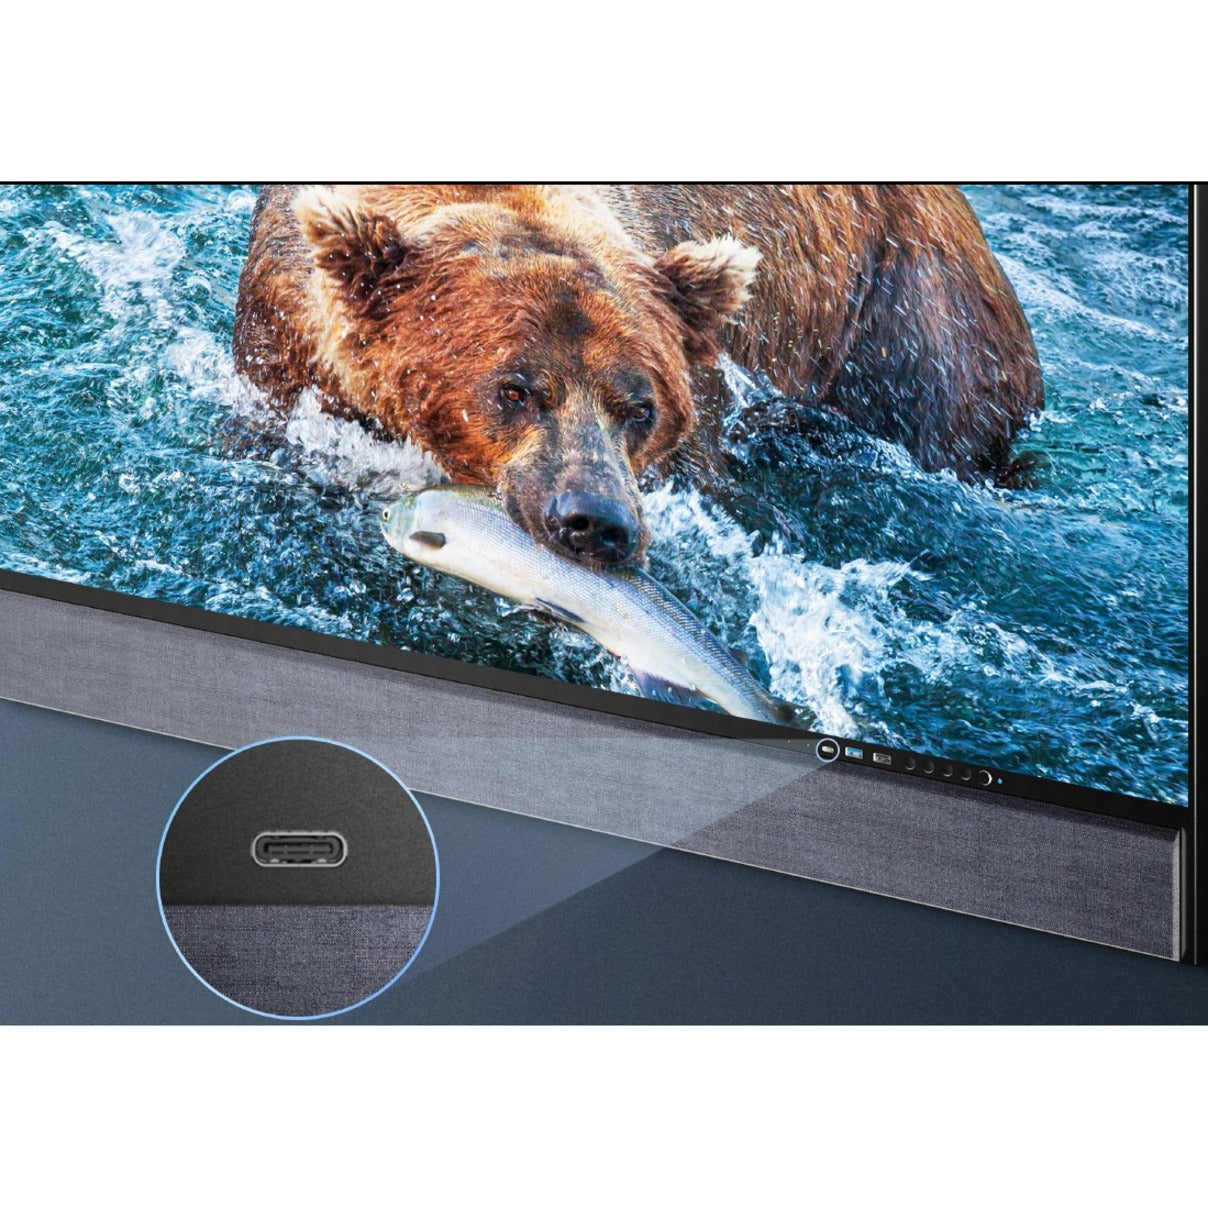 MaxHub LM138A07 Raptor Collaboration Display, 138in Full HD, Android 9.0 Pie, 2 Year Warranty